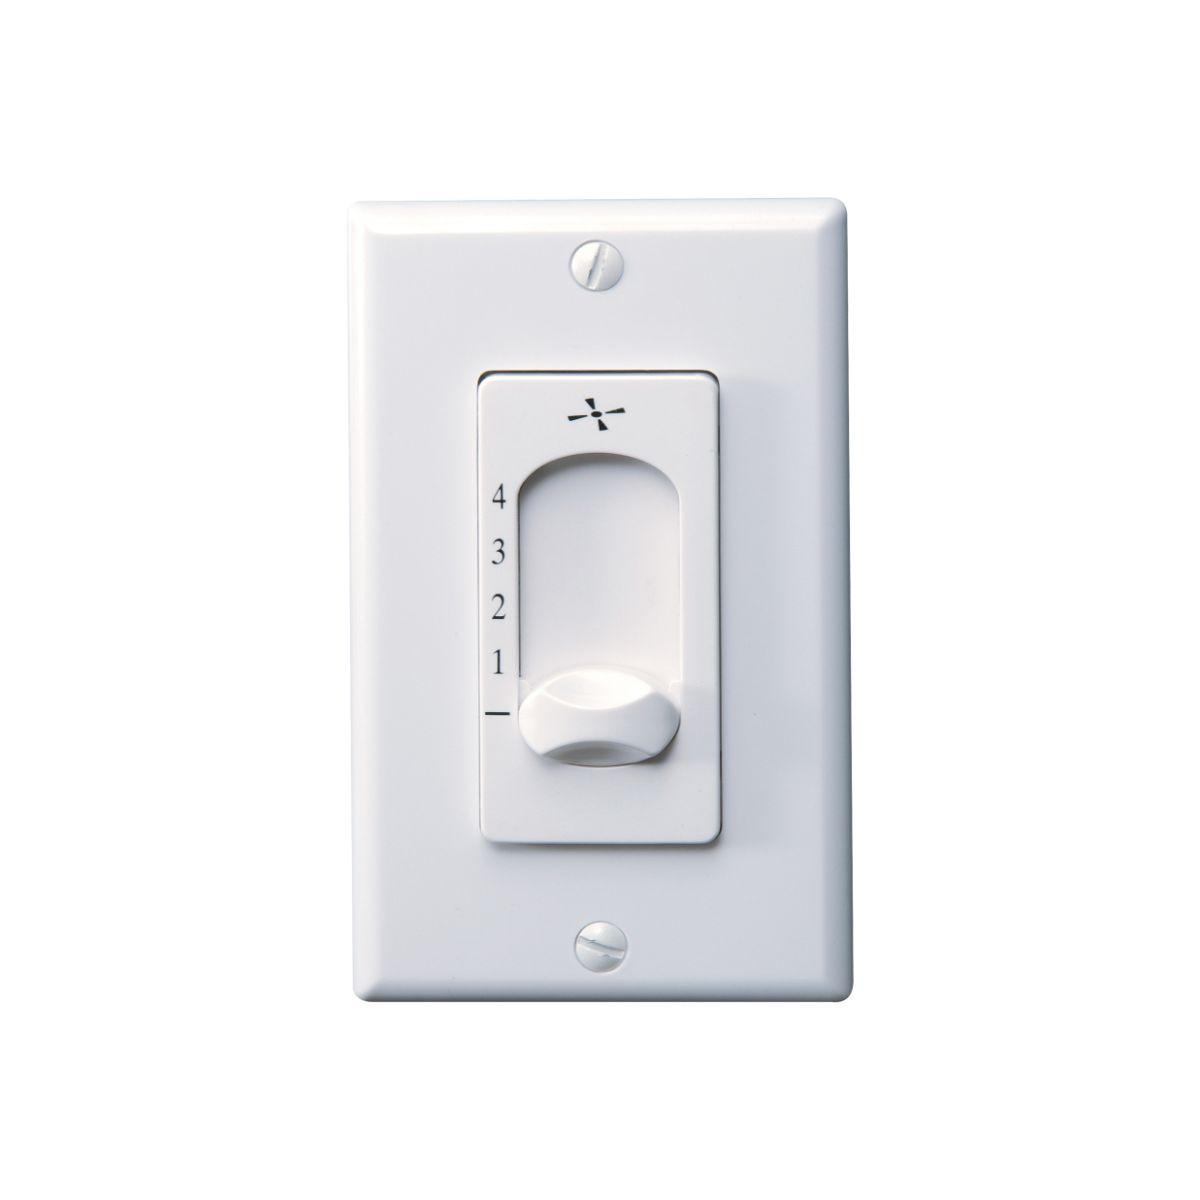 Universal 4-Speed Ceiling Fan Wall Control, White Finish - Bees Lighting